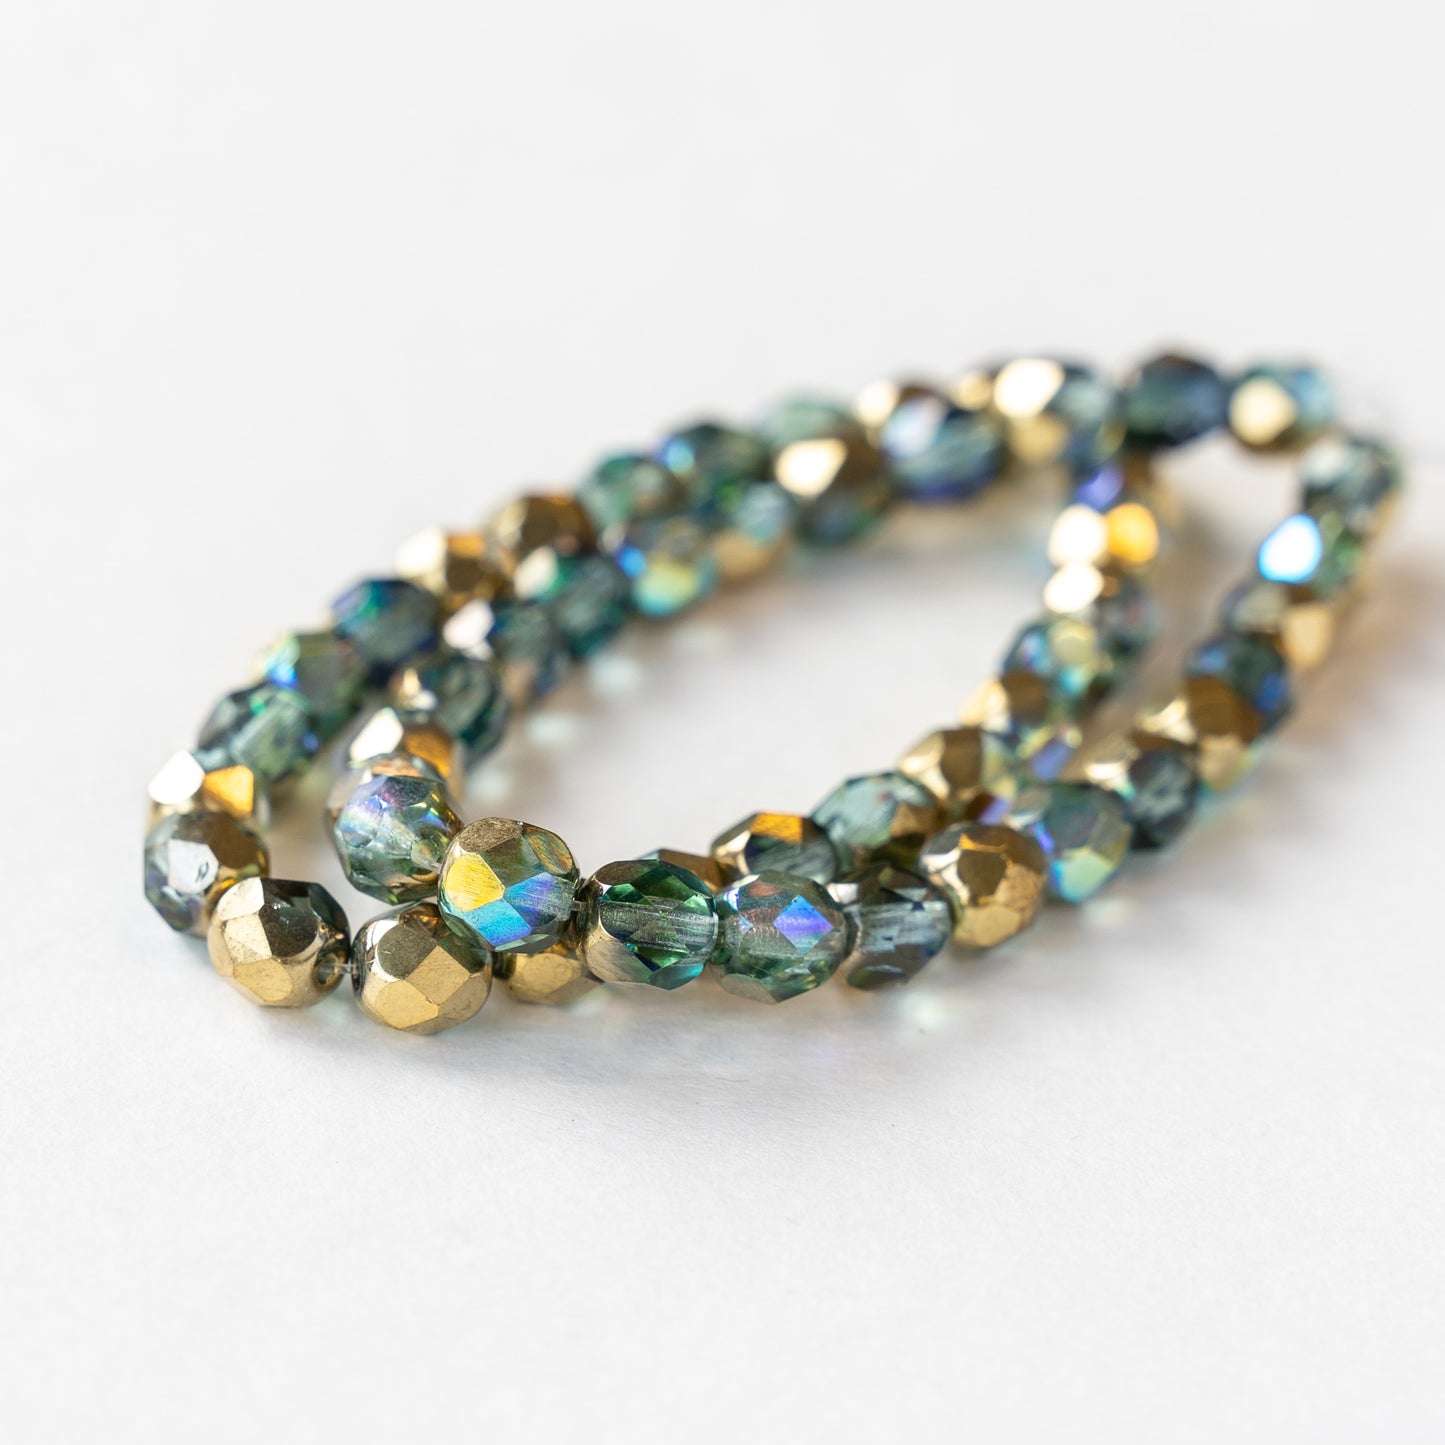 Load image into Gallery viewer, 6mm Round Firepolished Beads - Light Aqua Gold - 25 beads
